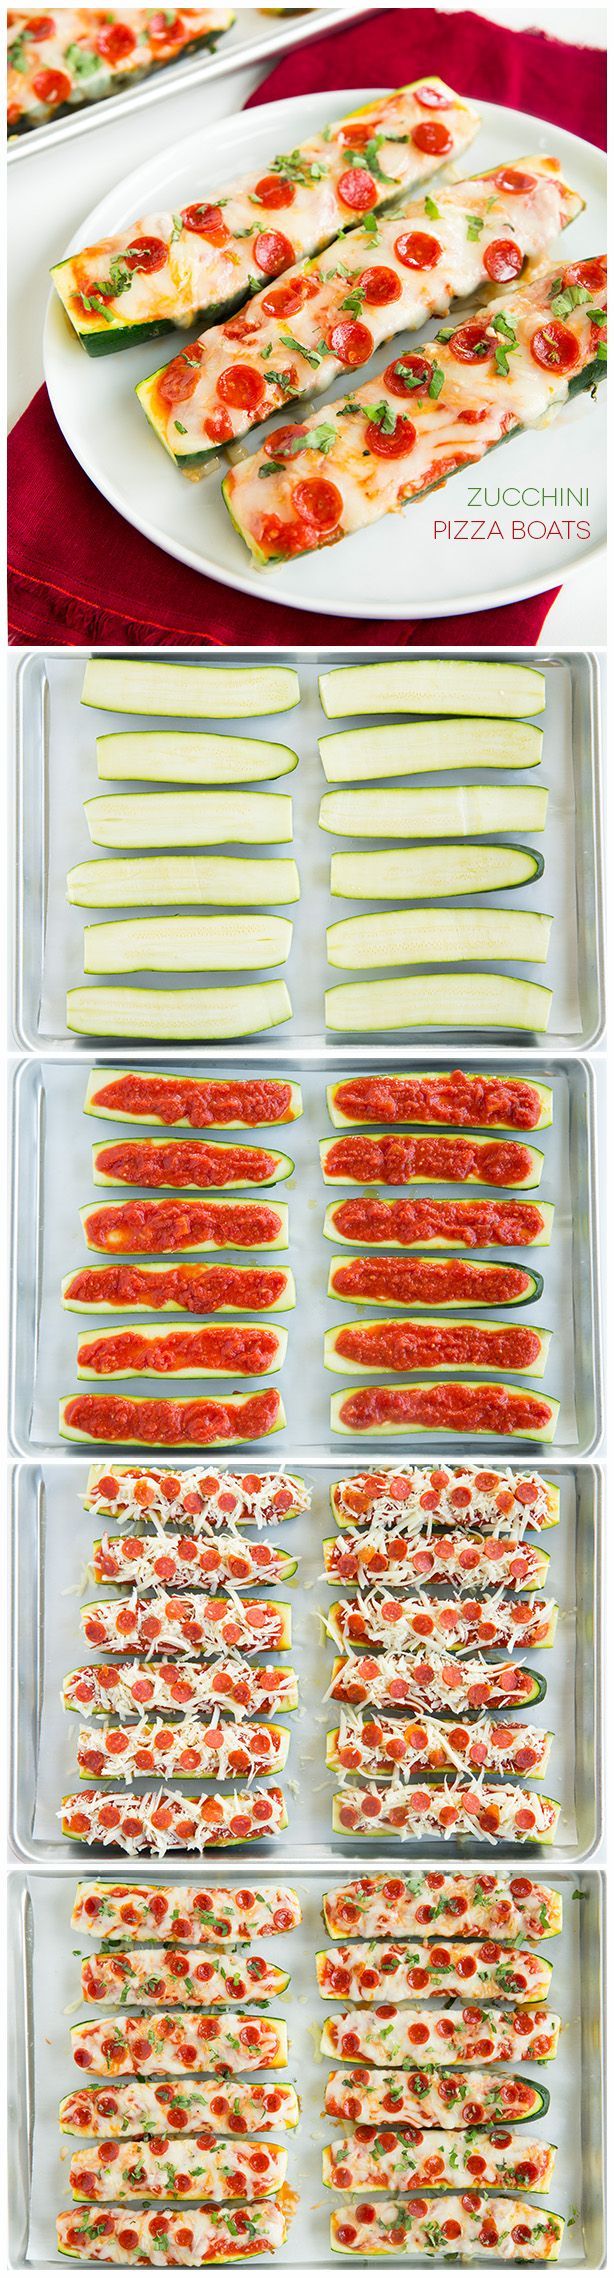 Zucchini Pizza Boats – They are INCREDIBLY good and only take about 10 minutes prep!! My whole family loved them (picky eaters